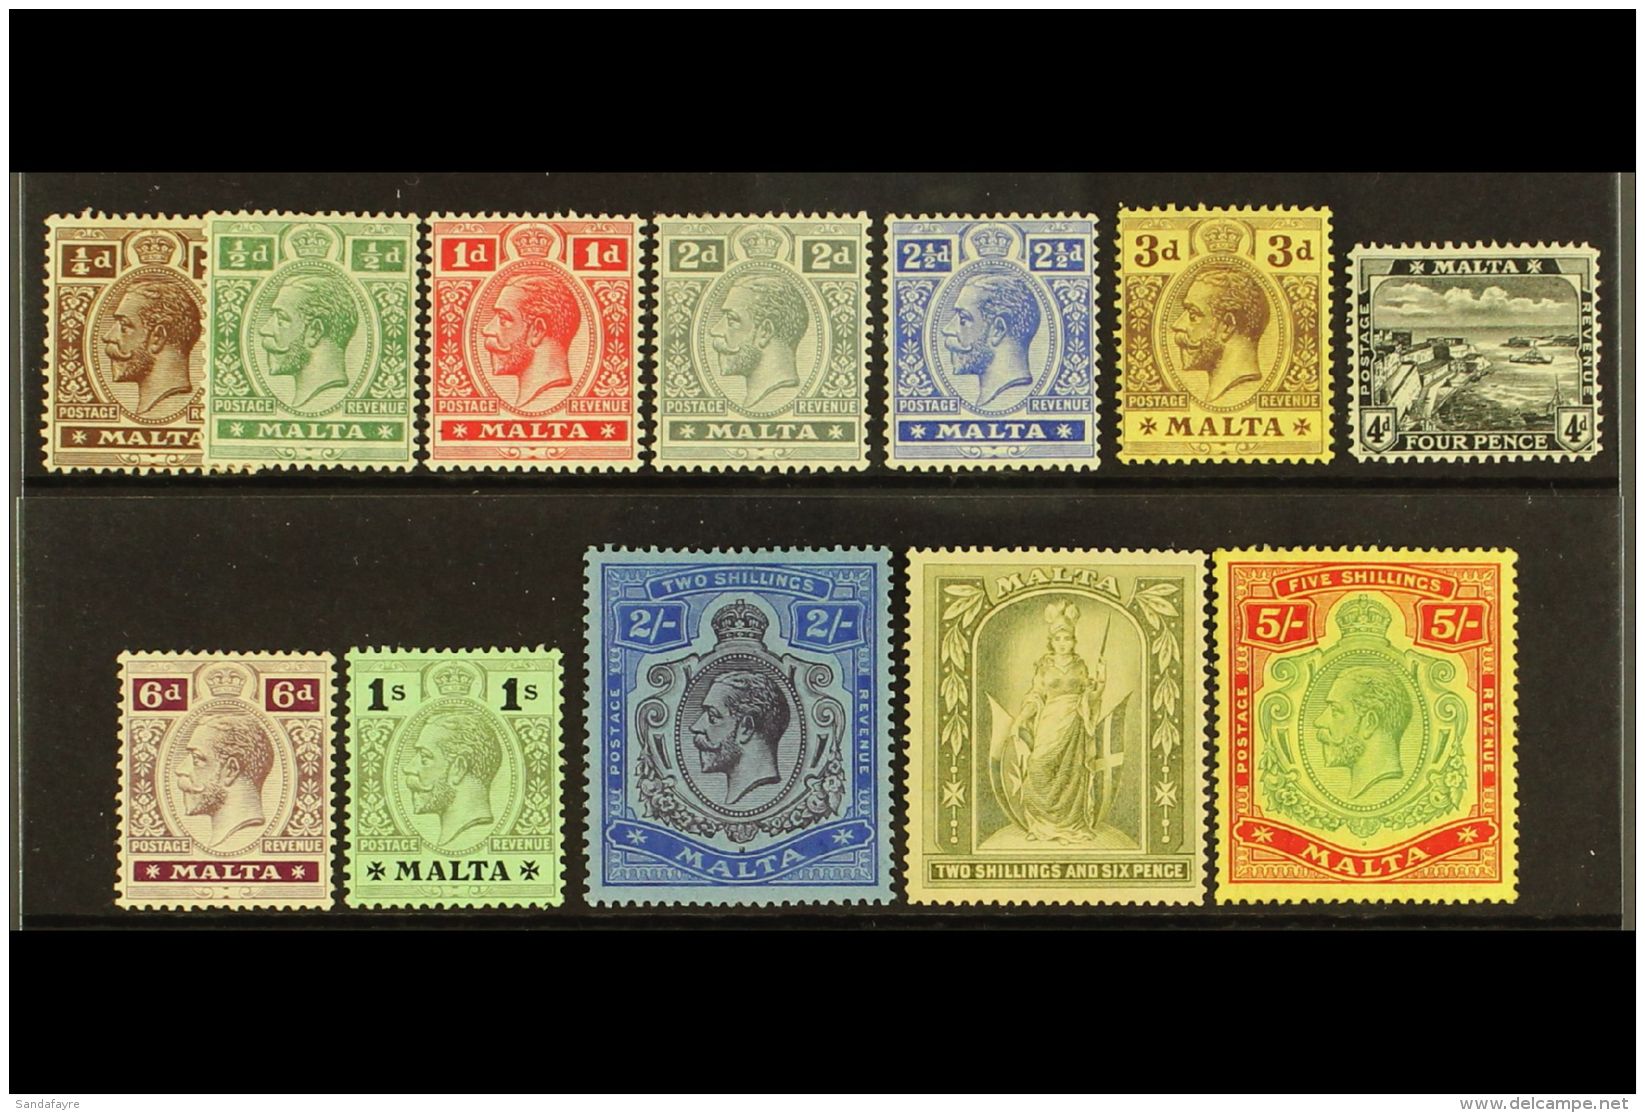 1914-21 (watermark Multiple Crown CA) Definitives Complete Set, SG 69/88, Very Fine Mint. (12 Stamps) For More... - Malta (...-1964)